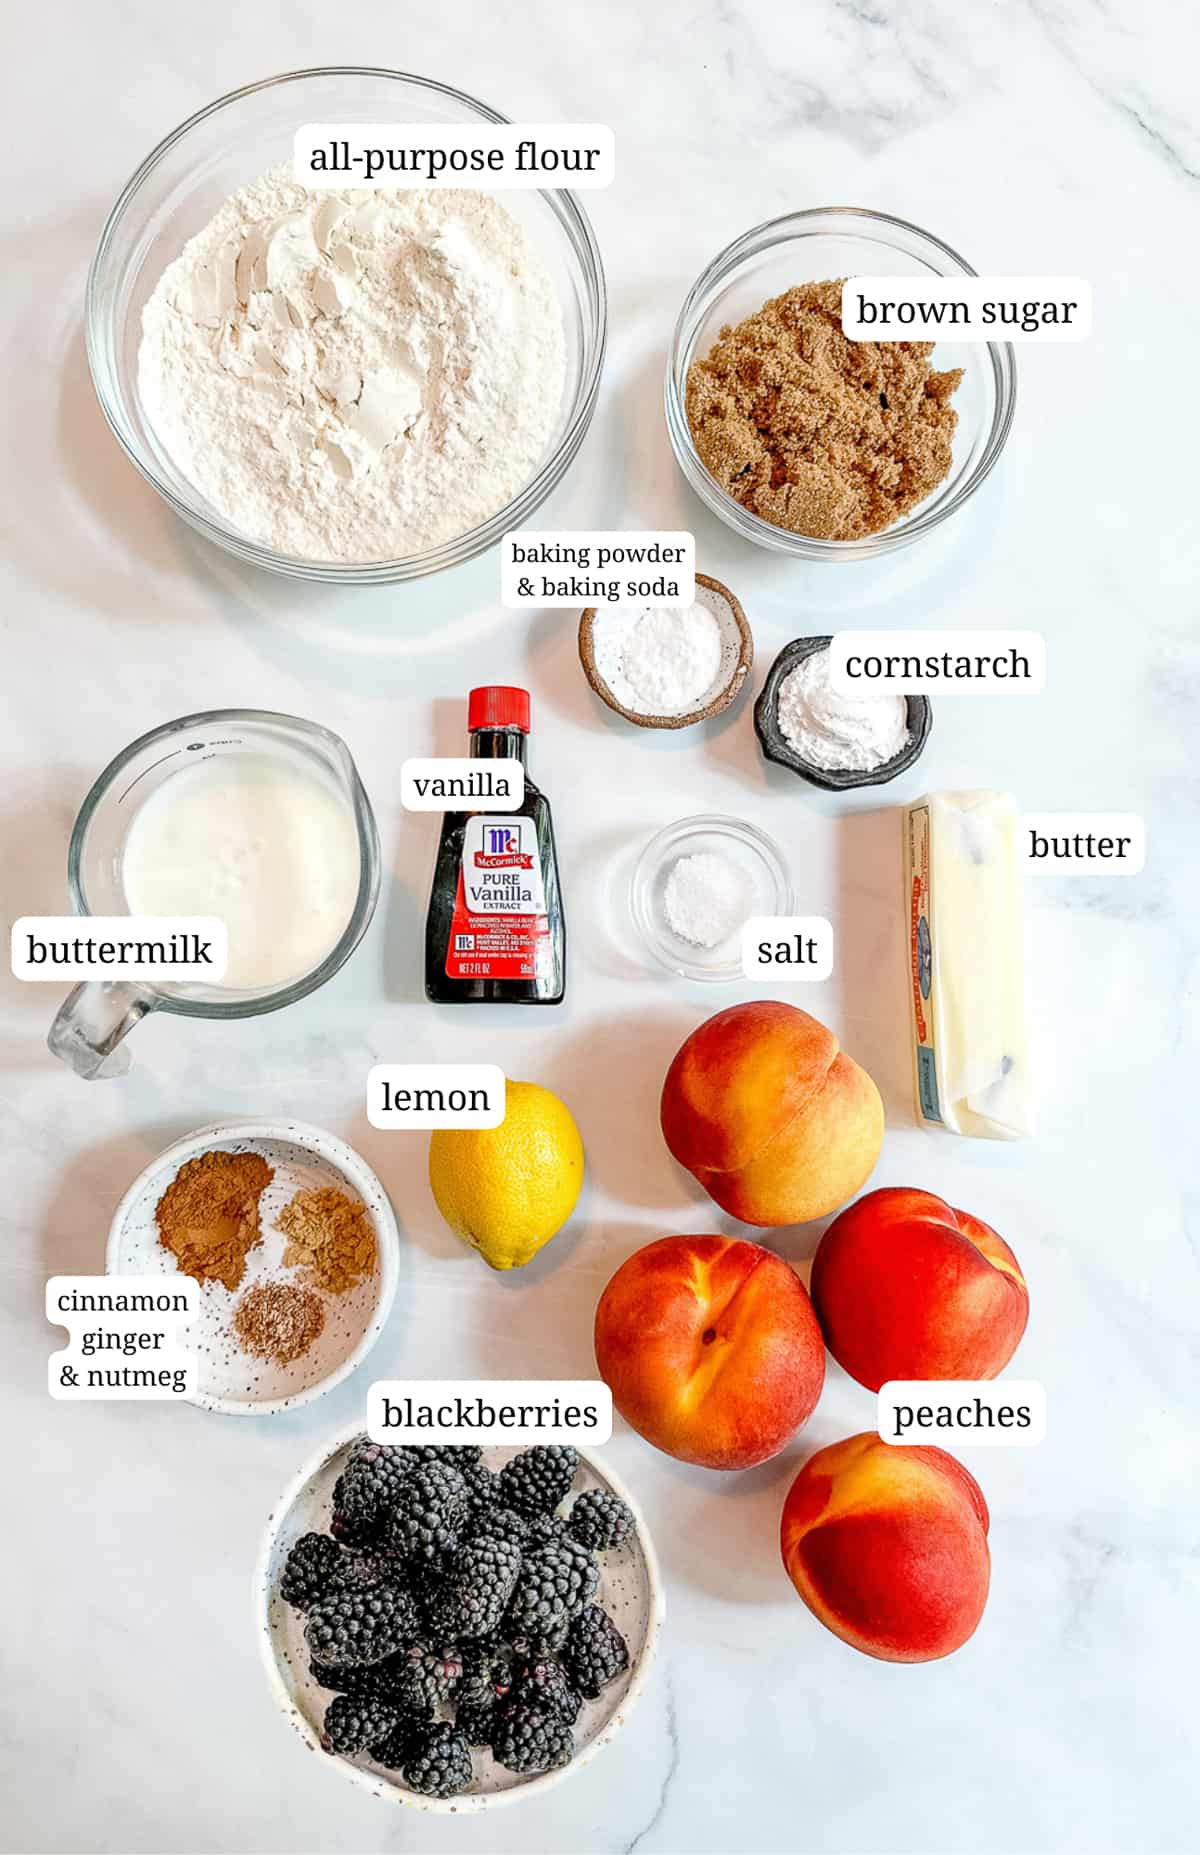 Labeled image of ingredients to make blackberry peach cobbler.